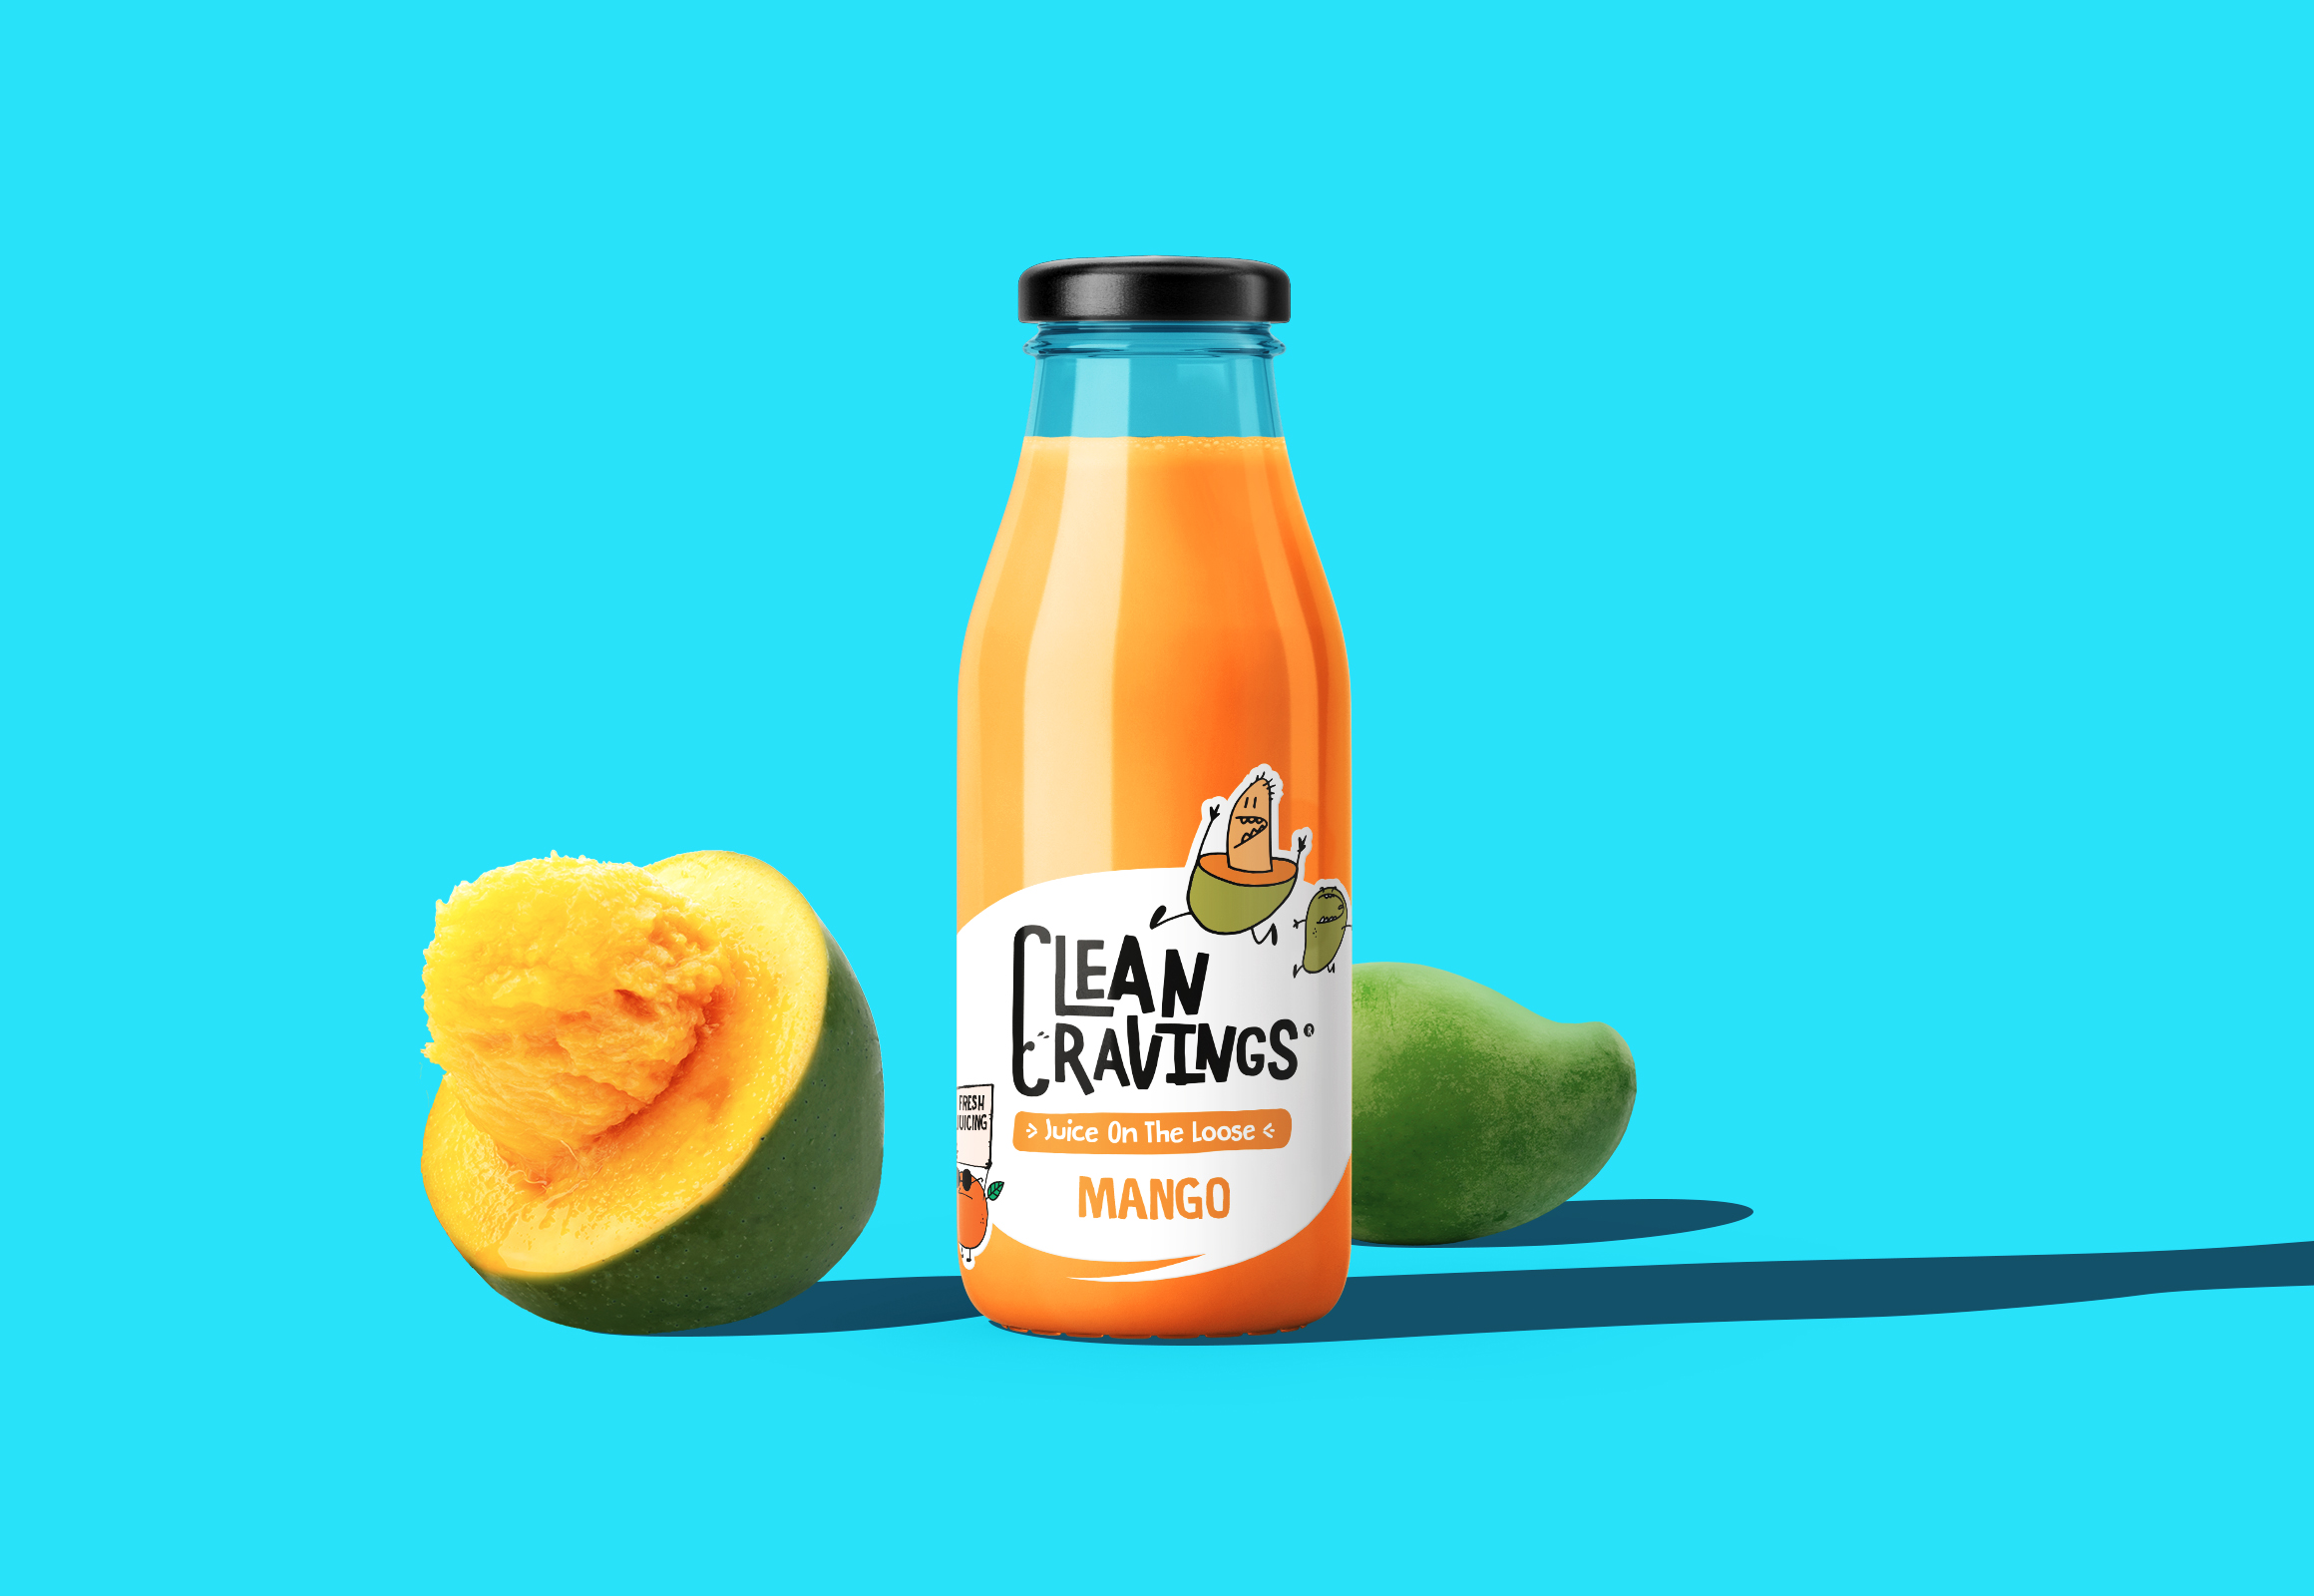 The Brand Company Designs Clean Cravings Juices Packaging